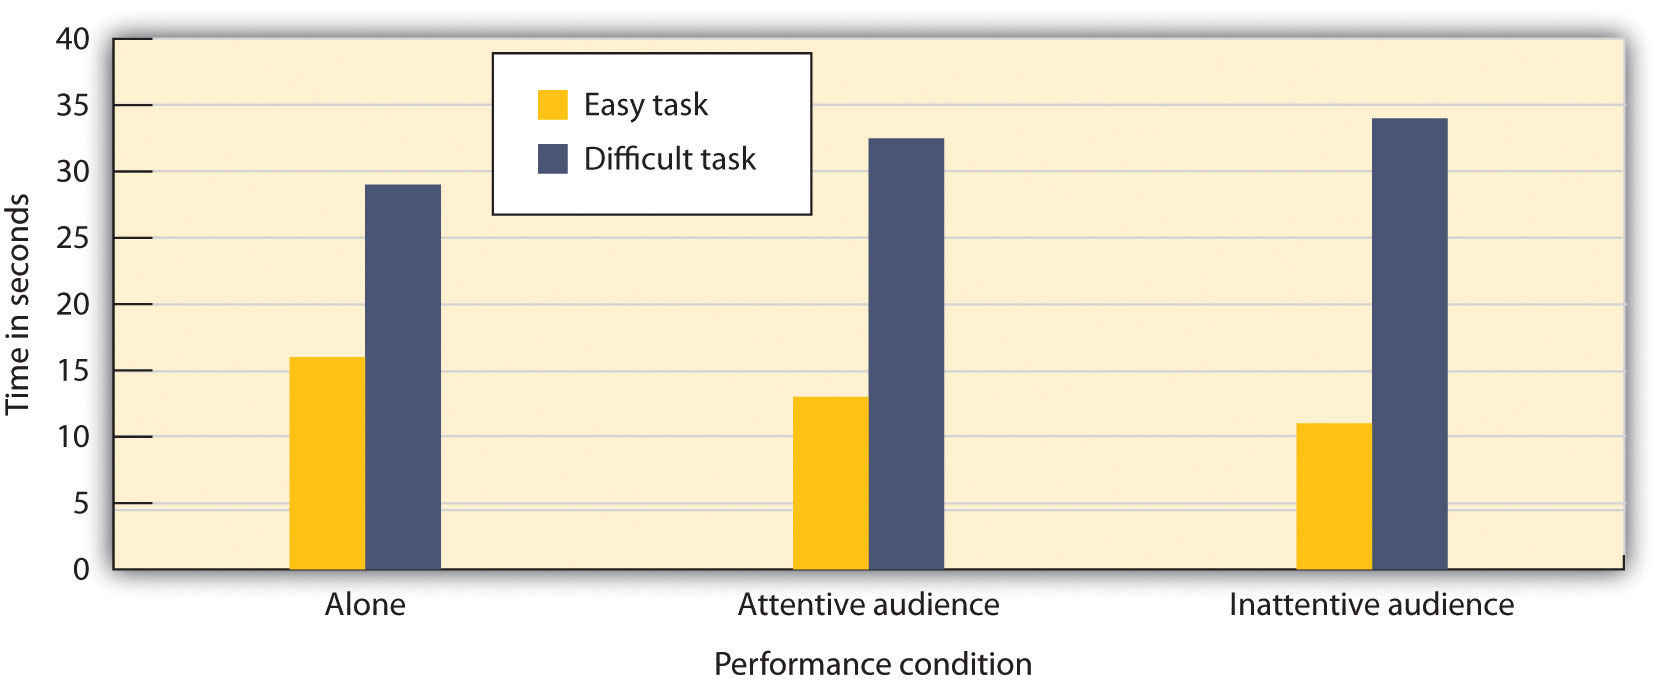 In this experiment, participants were asked to perform a well-learned task (tying their shoes) and a poorly learned task (putting on a lab coat that tied in the back). There is both a main effect of task difficulty and a task-difficulty-by-performance-condition interaction.